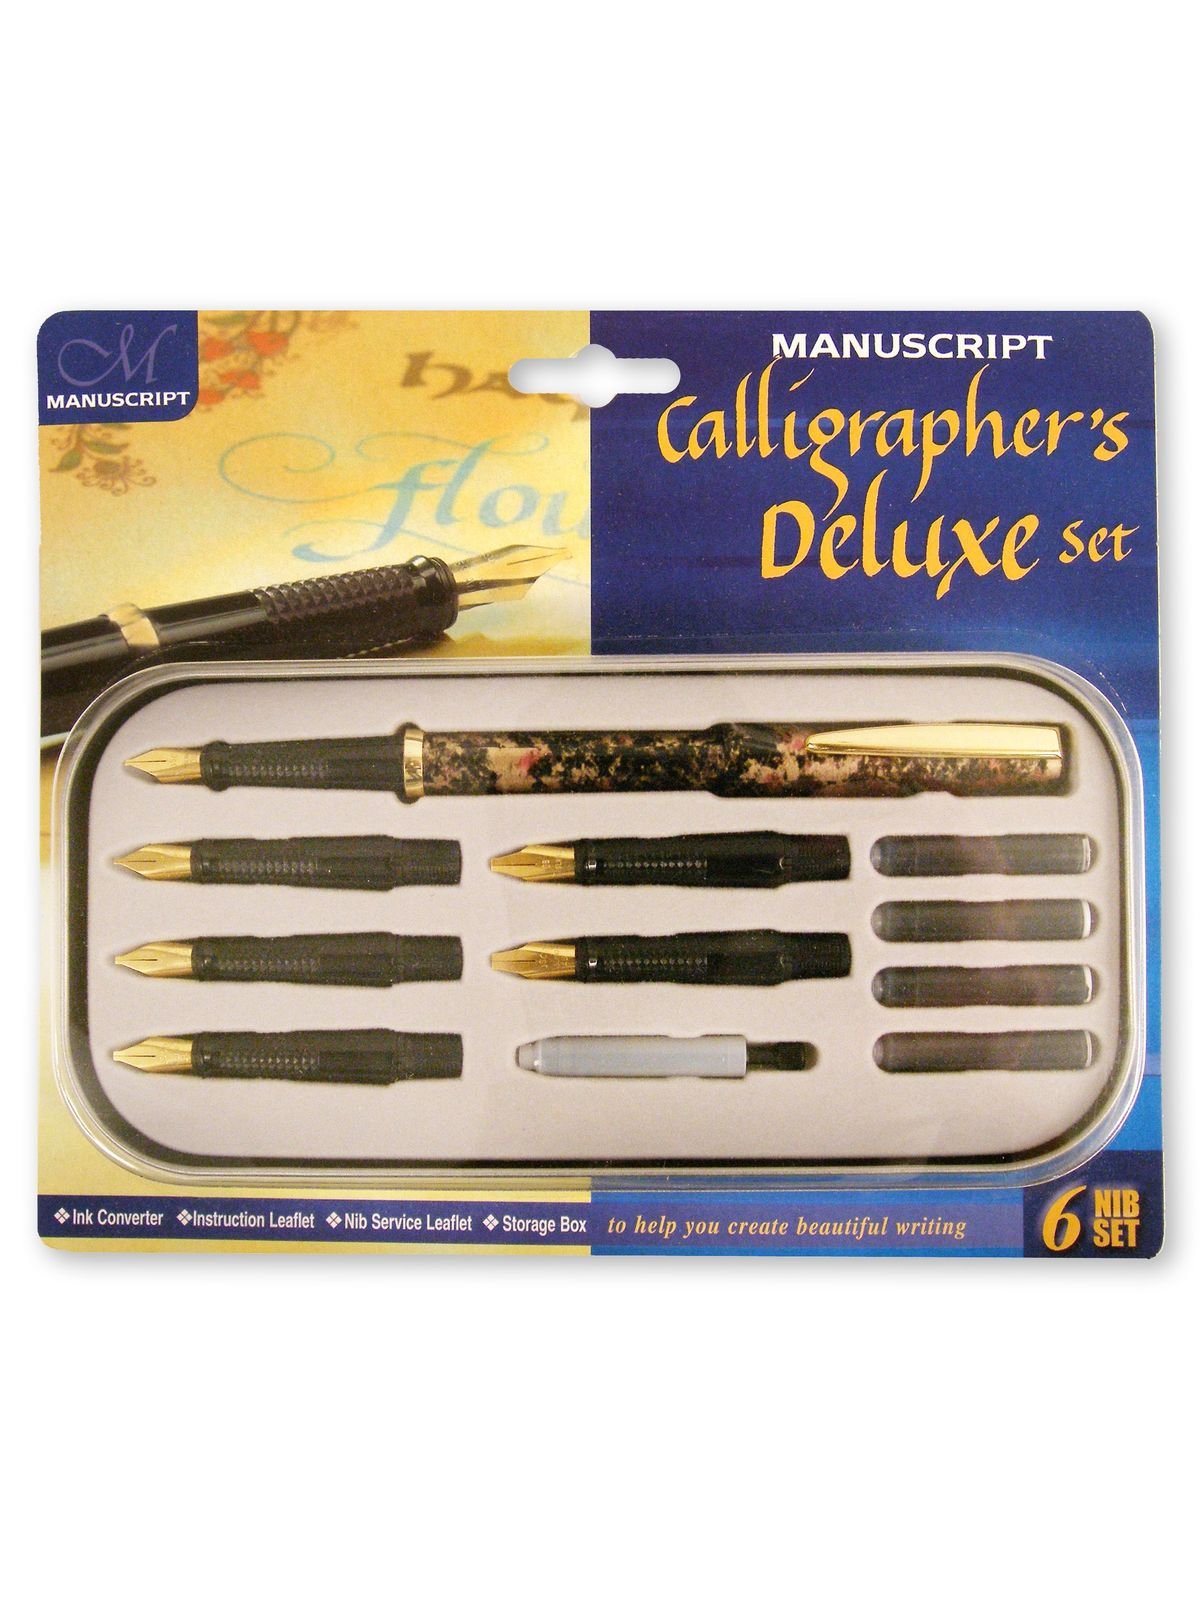 Manuscript Beginner's Calligraphy Set - available to ship at